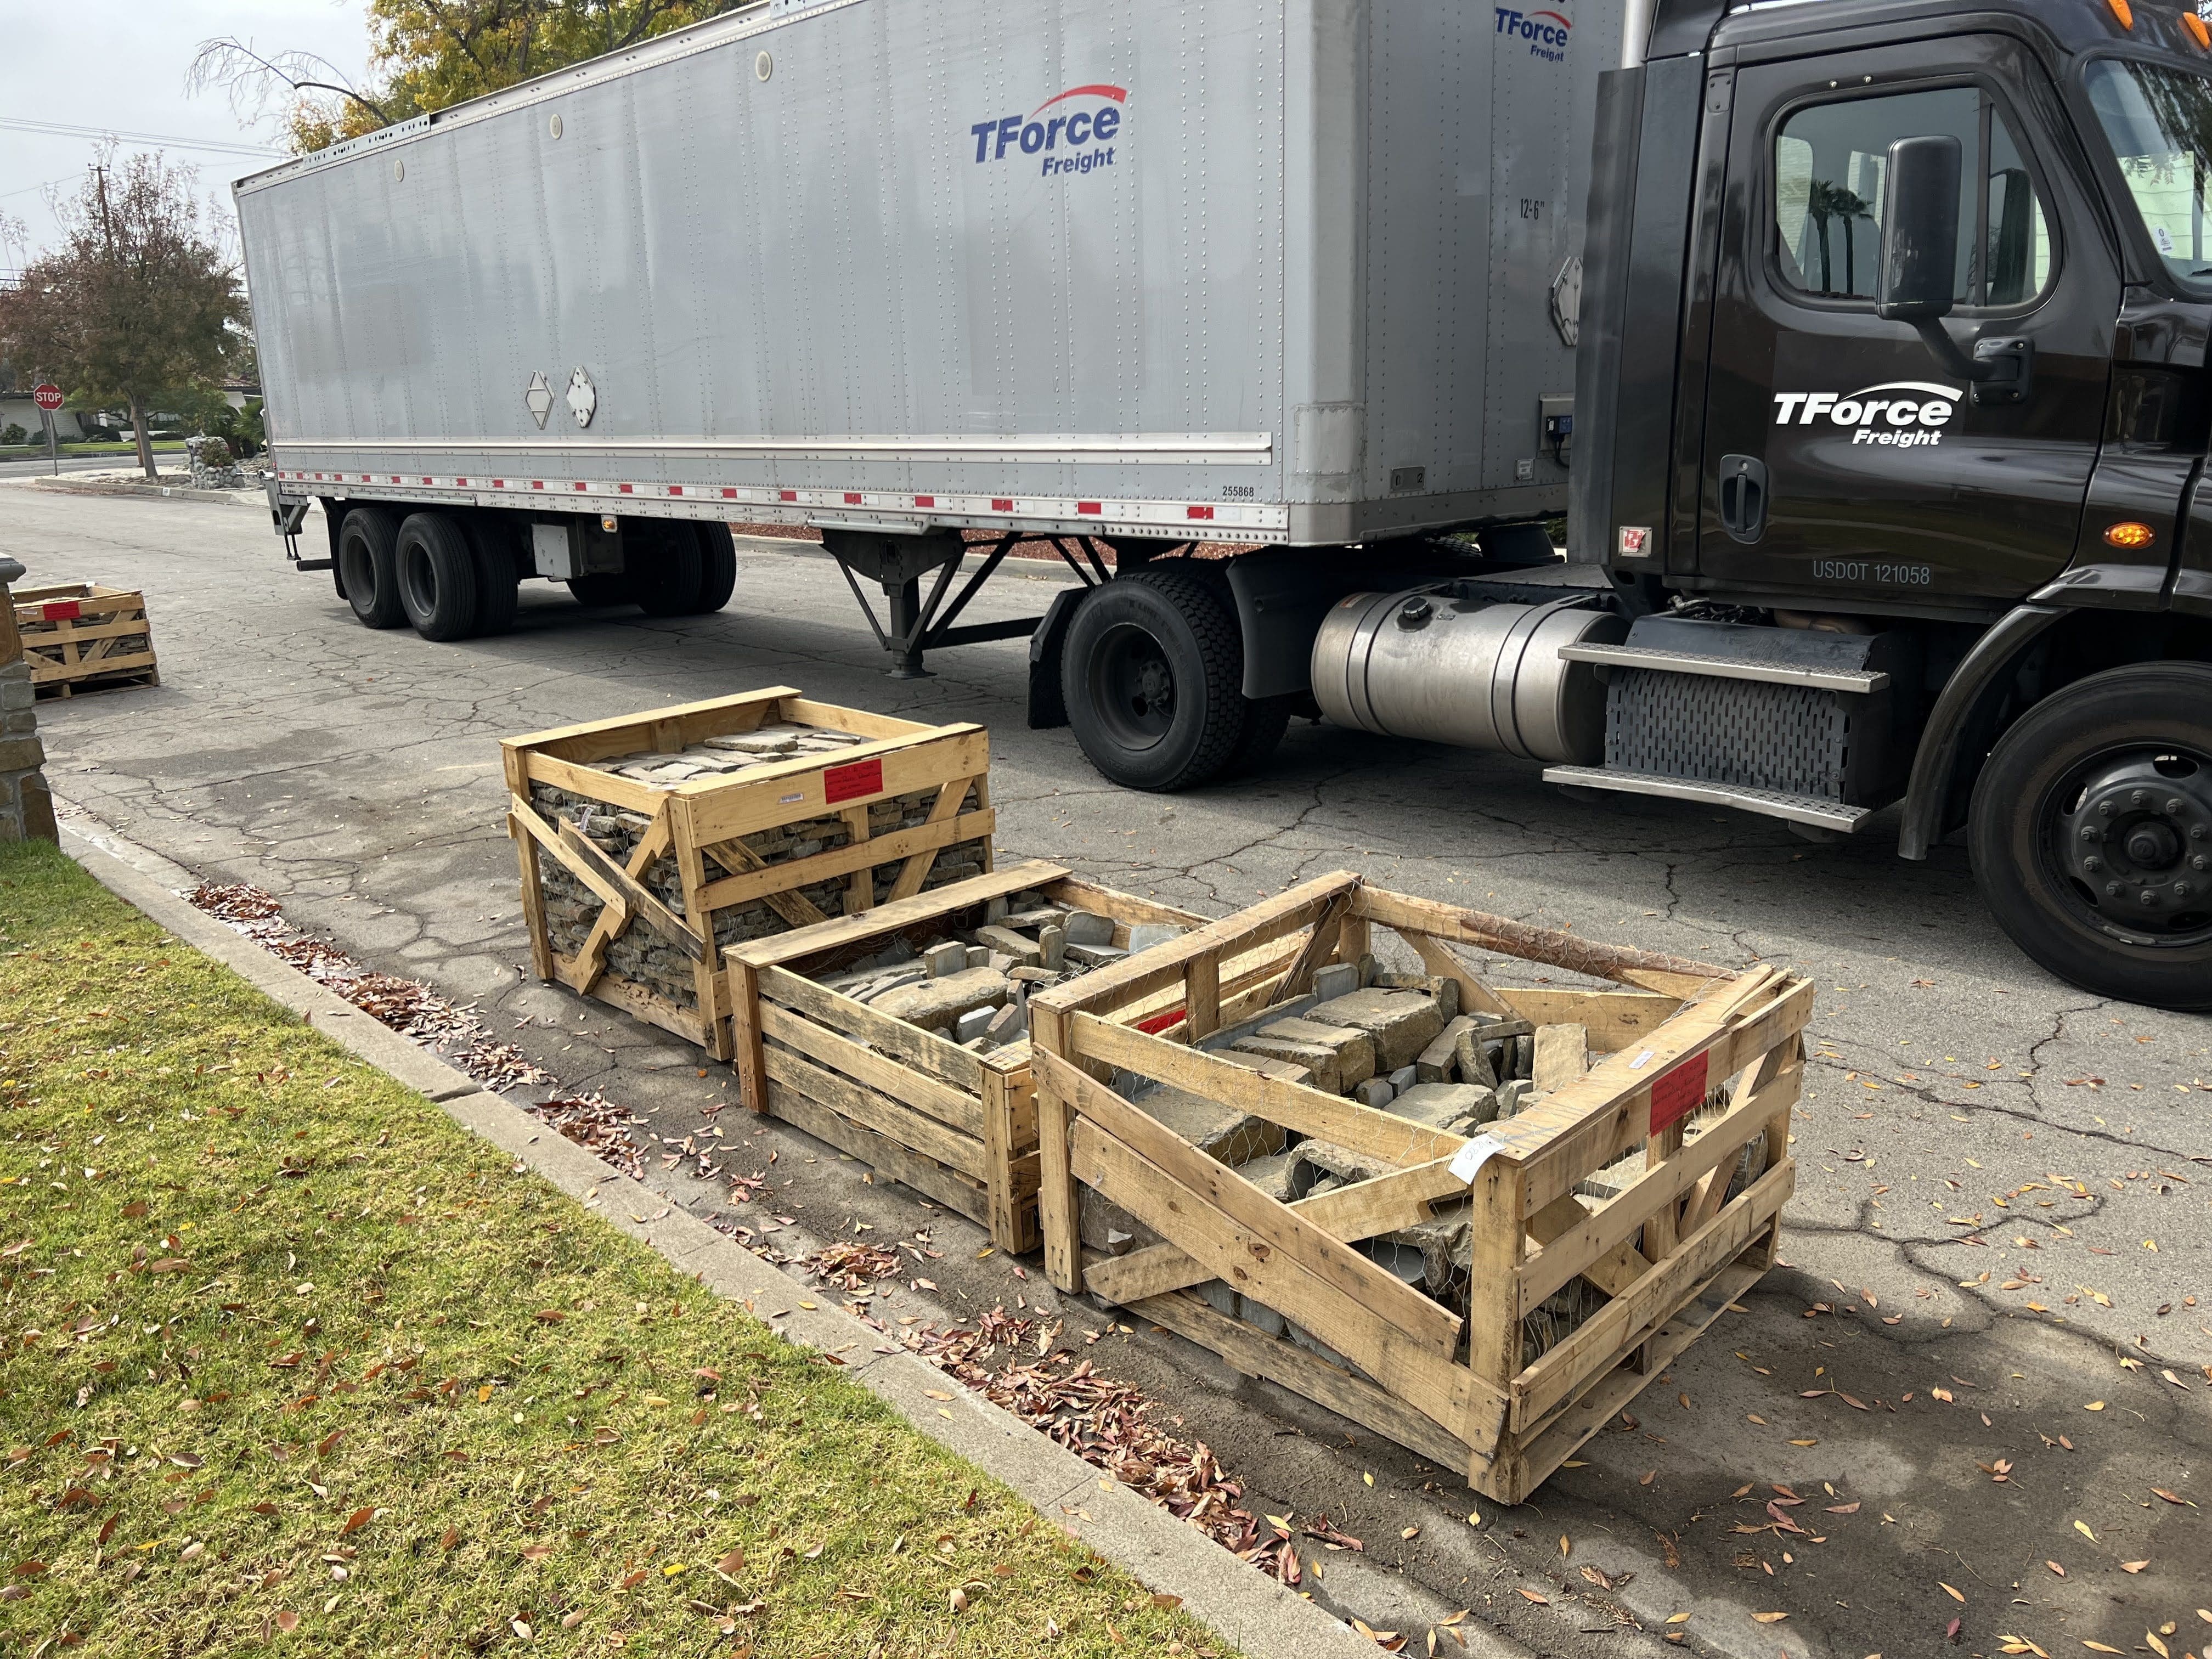 Free Delivery of Real Stone Veneer Pallets by Semi-Truck